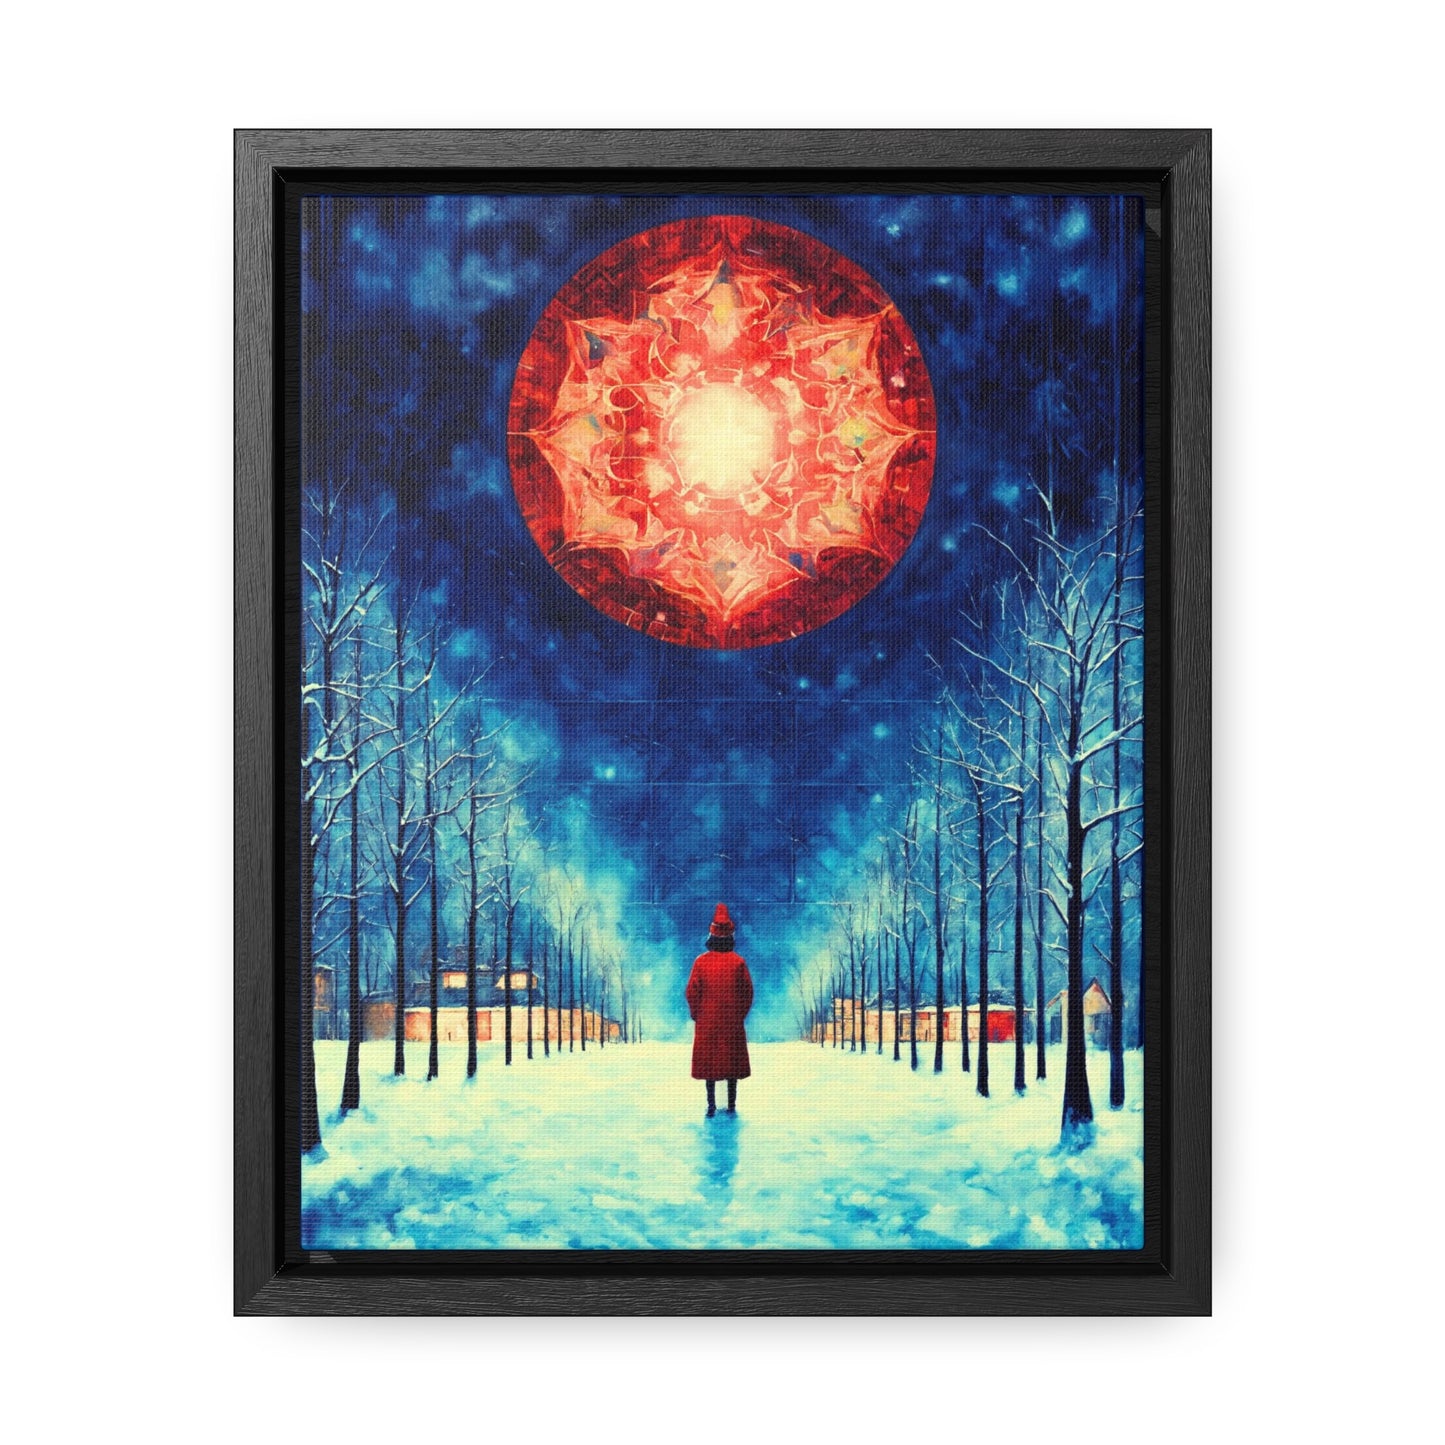 Fire Moon in Winter Forest Night Gallery Canvas Wraps, Vertical Frame